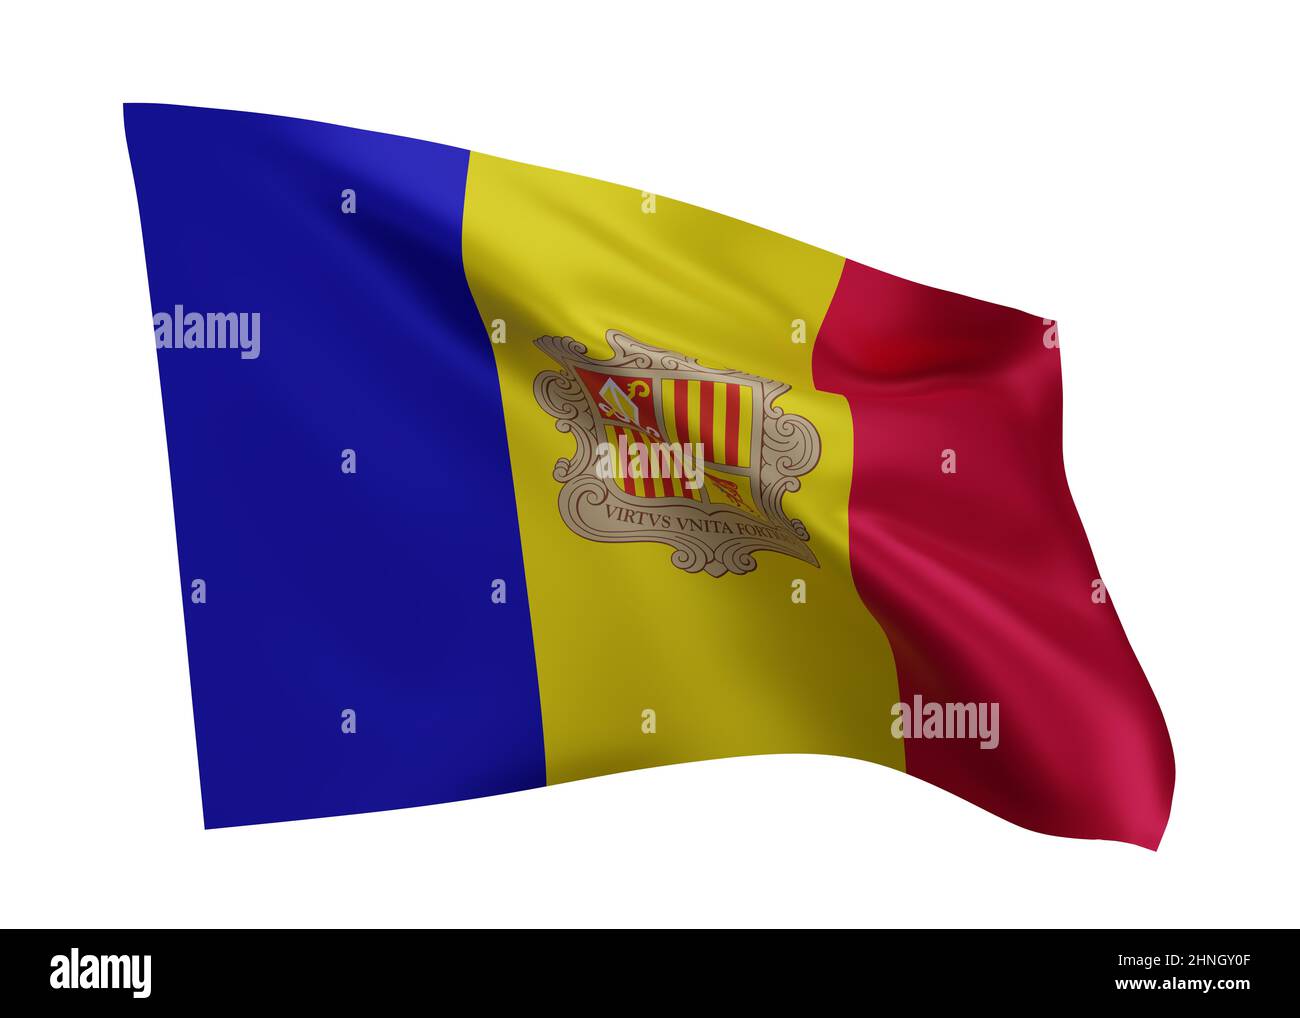 3d illustration flag of Andorra. Andorran high resolution flag isolated against white background. 3d rendering Stock Photo